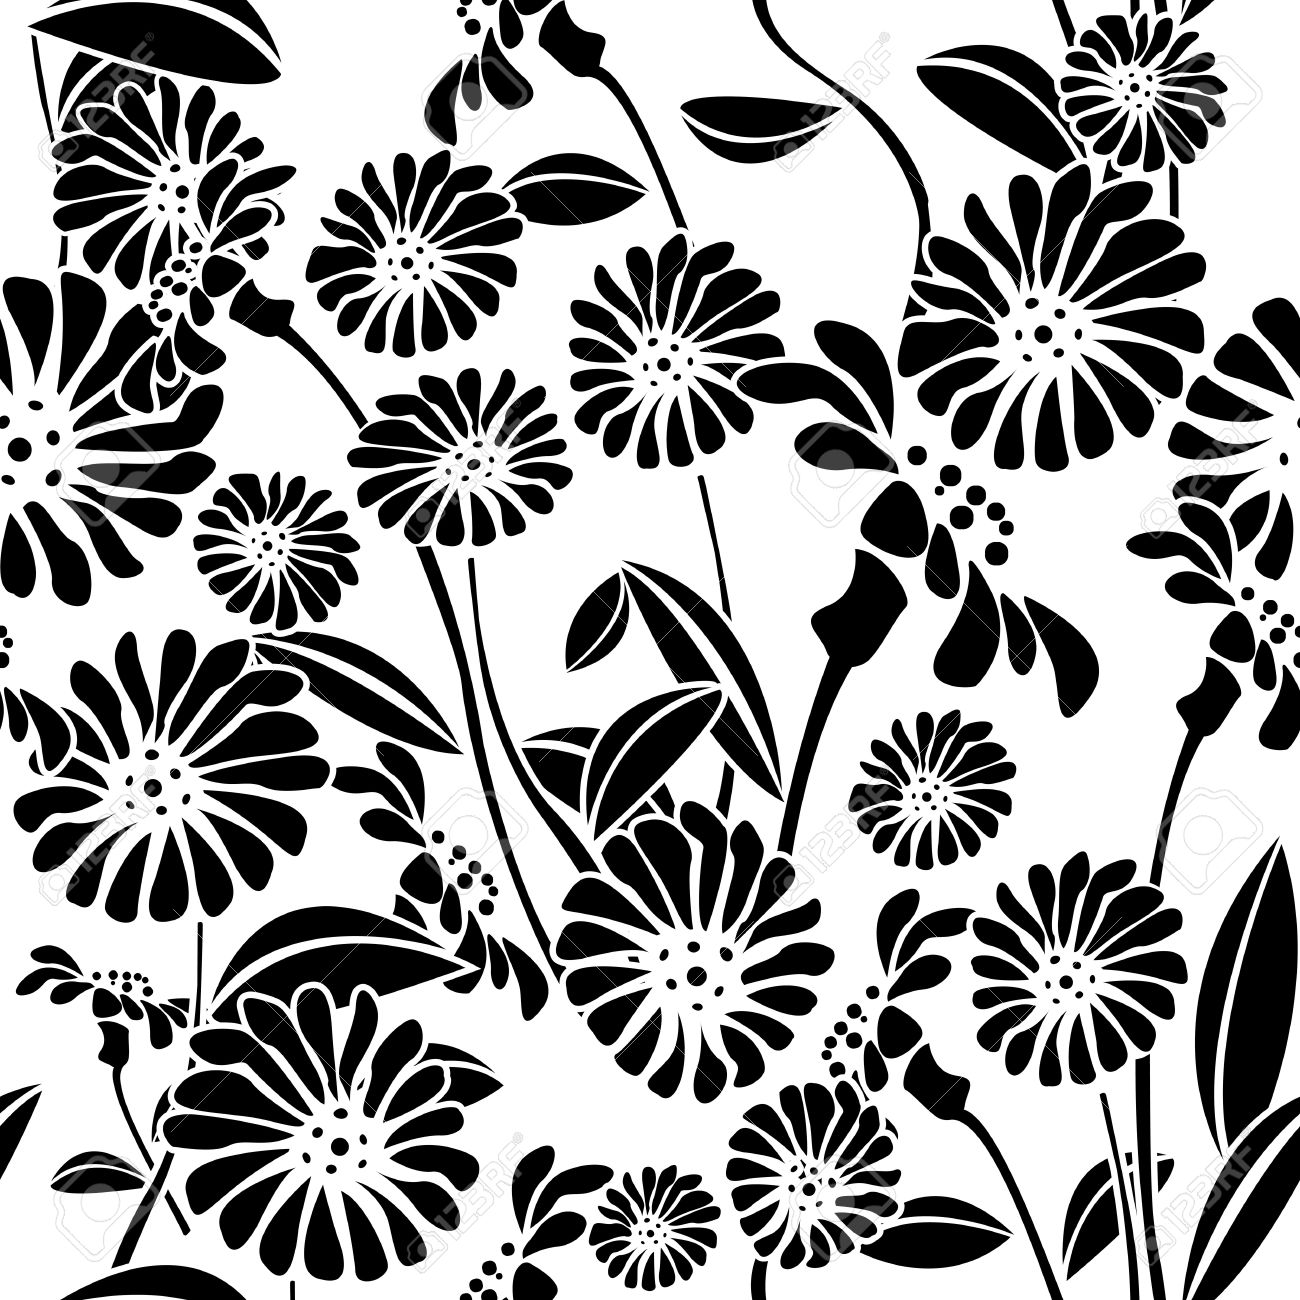 Black and white floral art